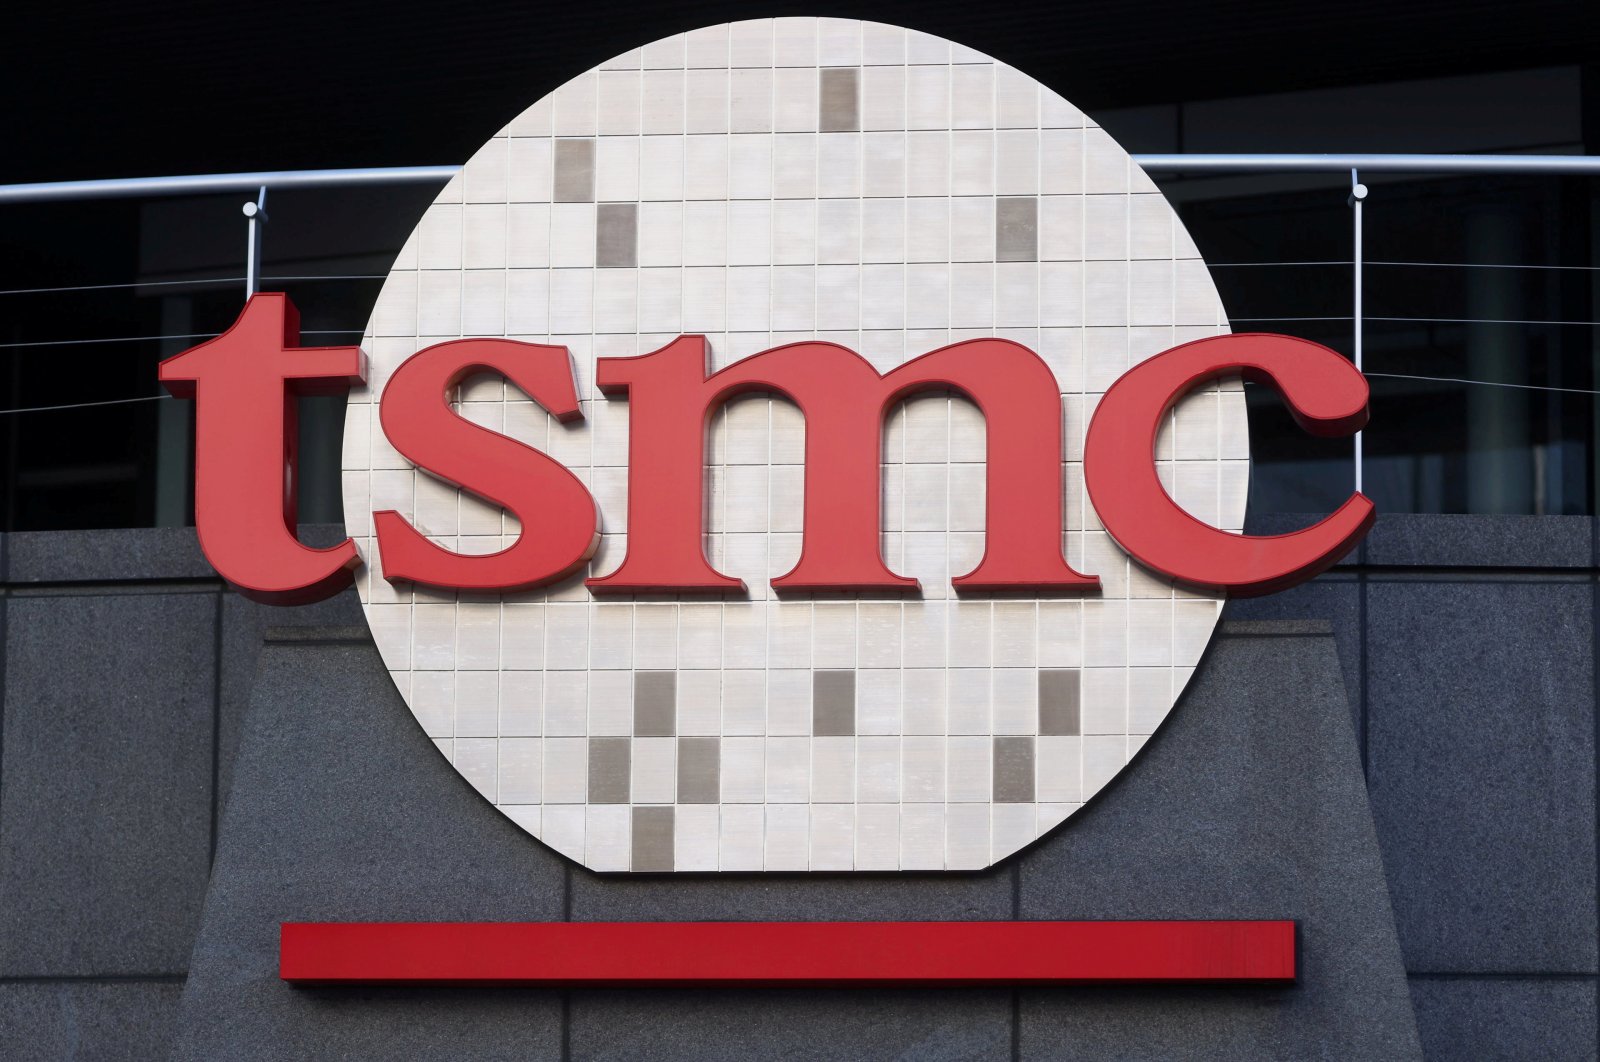 The logo of Taiwan Semiconductor Manufacturing Co (TSMC) is pictured at its headquarters, in Hsinchu, Taiwan, Jan. 19, 2021. (Reuters Photo)